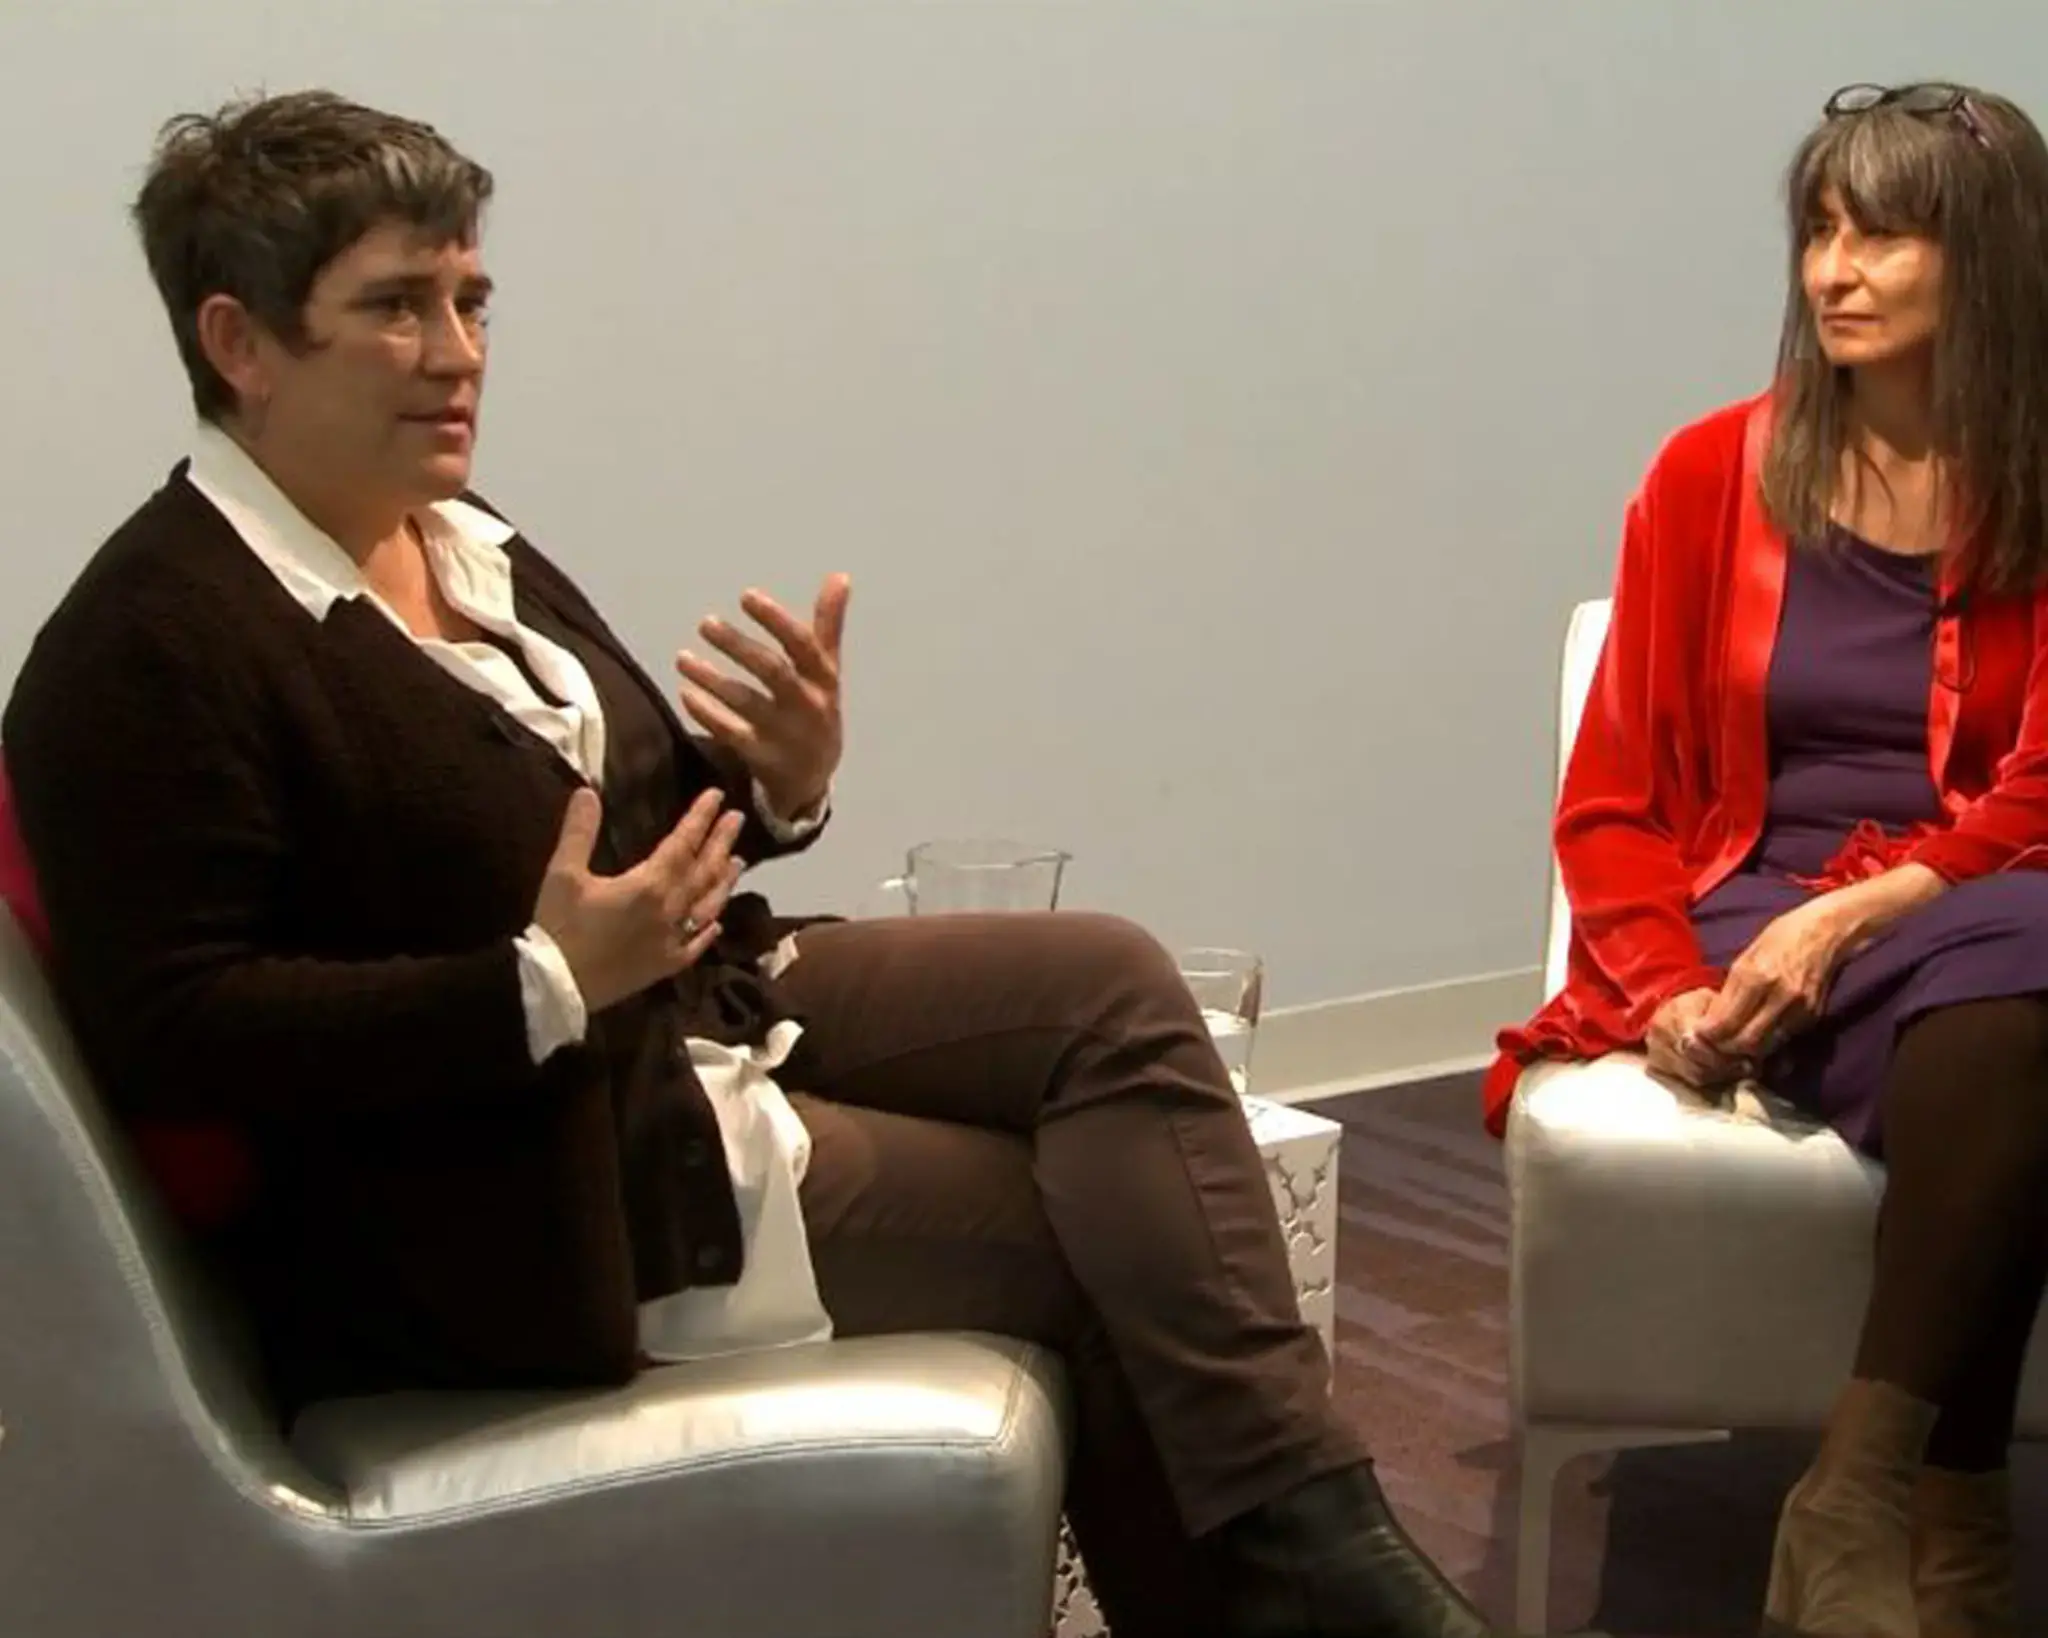 Visiting scholar Kristy Edmunds in conversation with Limor Tomer at The Pew Center for Arts &amp; Heritage on May 28, 2014.